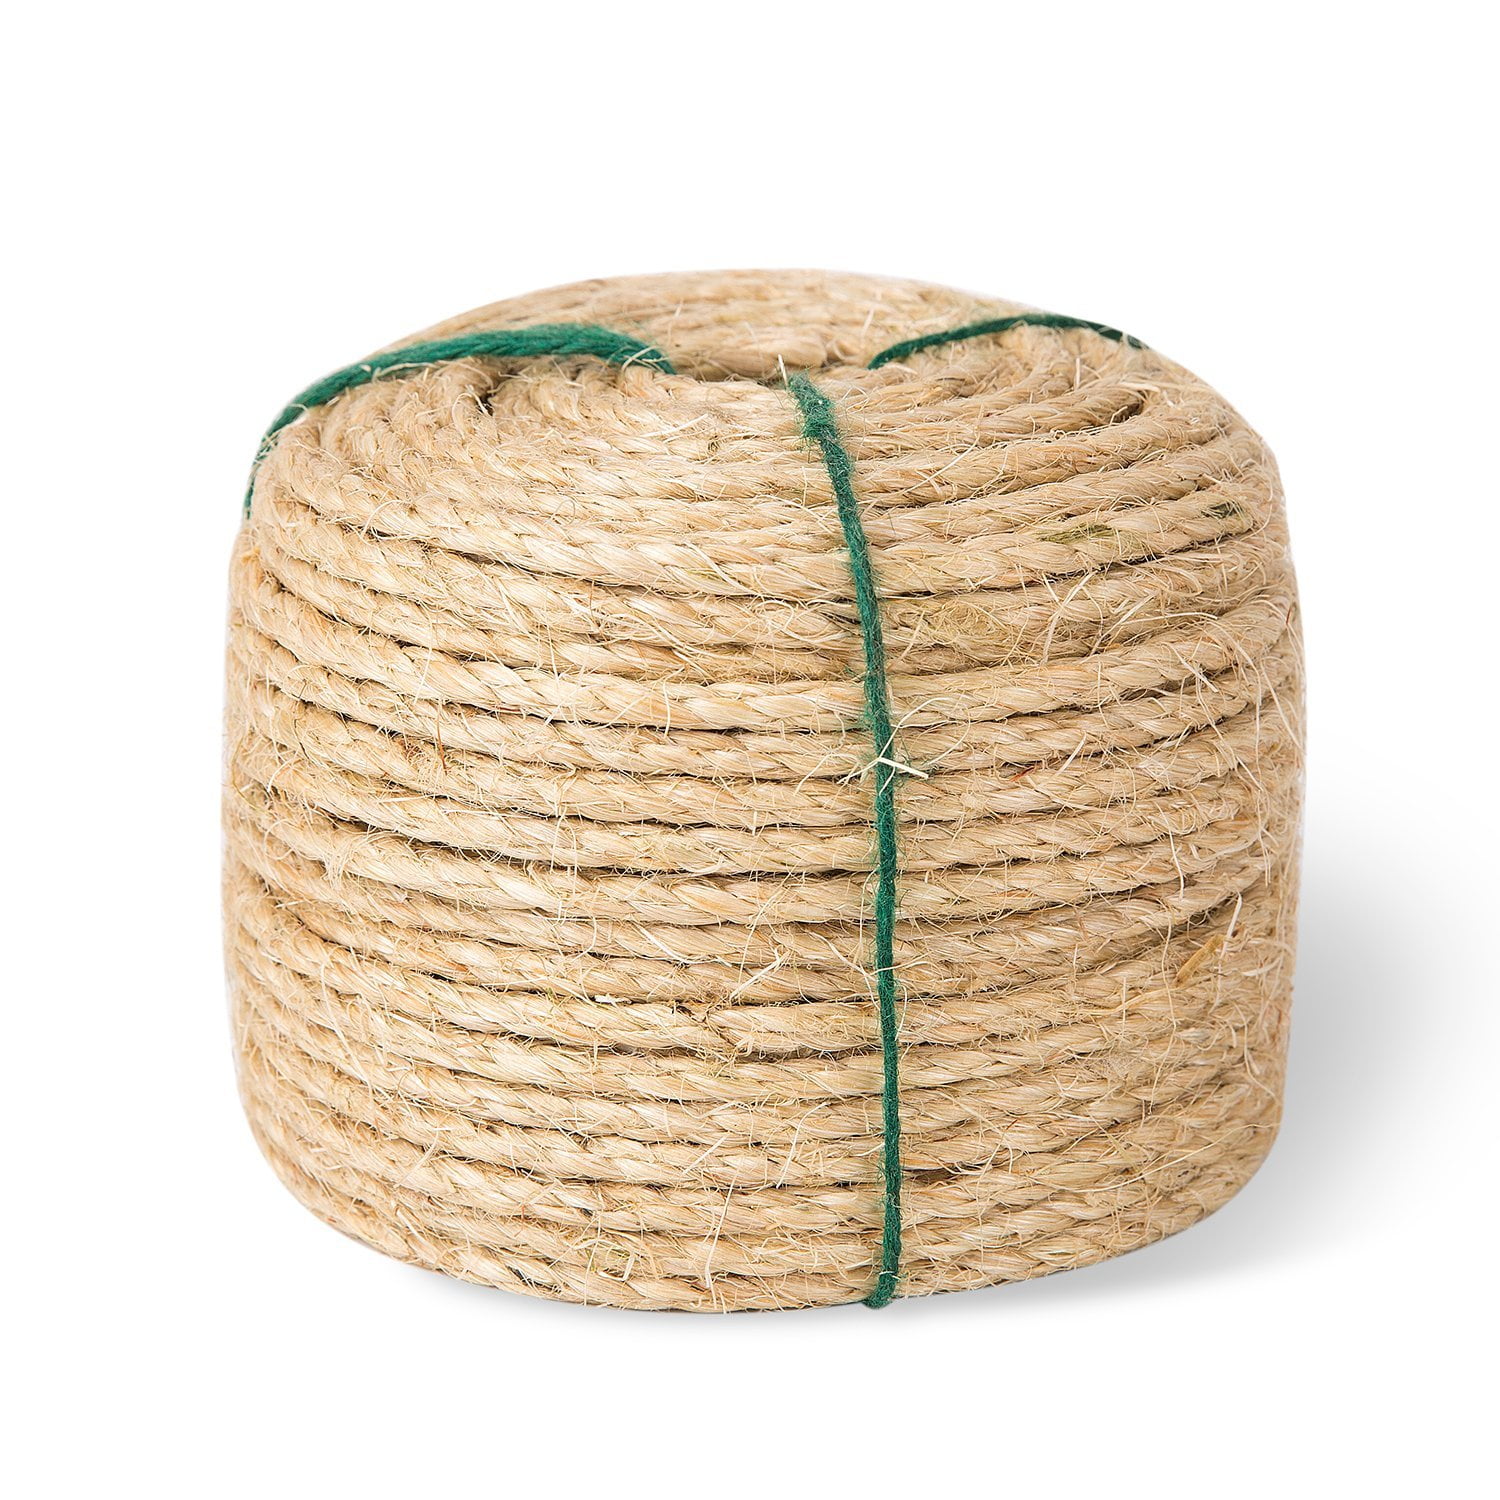 Indoor/Outdoor 25 feet Moisture/Weather Resistant All Natural Fibers 3/8 inch Wicker Chair Twisted Sisal Rope Decor Tie-Downs Projects Cat Scratching Post - SGT KNOTS Marine 